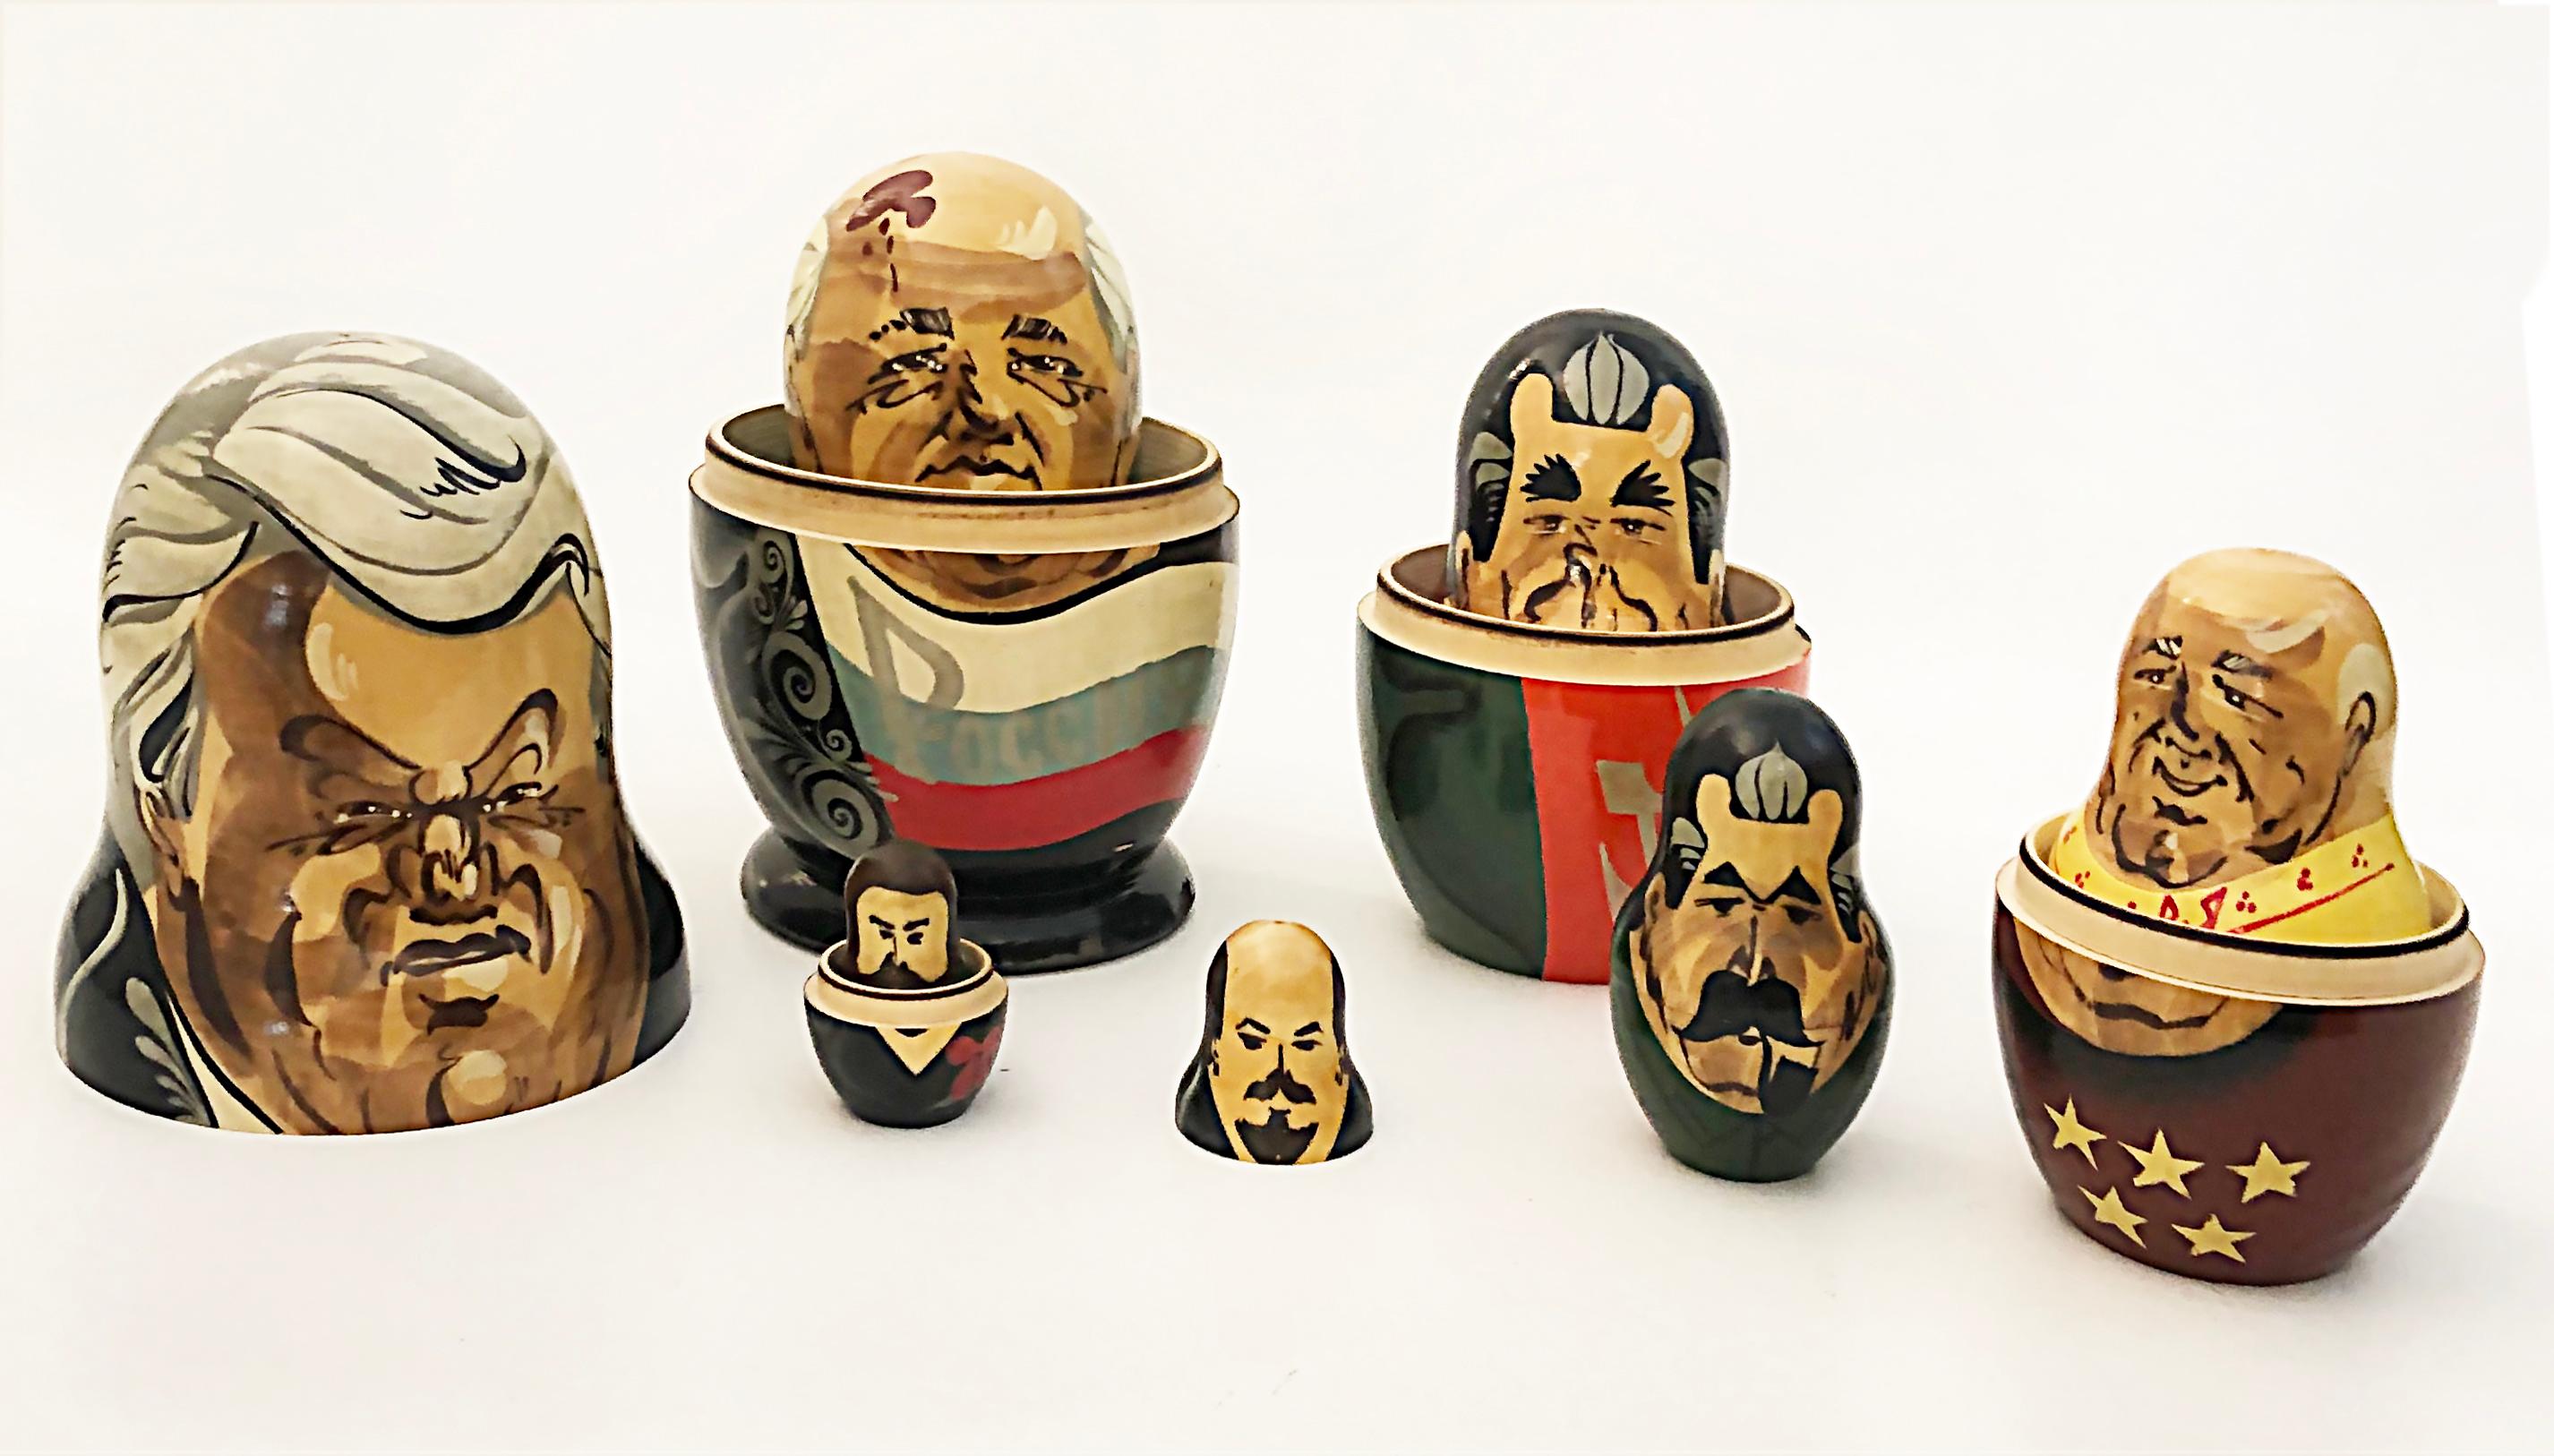 Vintage Gorbachev Hand-painted Russian Nesting 7 Doll Set, Late 20th Century

Offered for sale is a set of late 20th-century Russian nesting dolls that stack inside one another with the largest exterior doll being of Gorbachev. There are 7